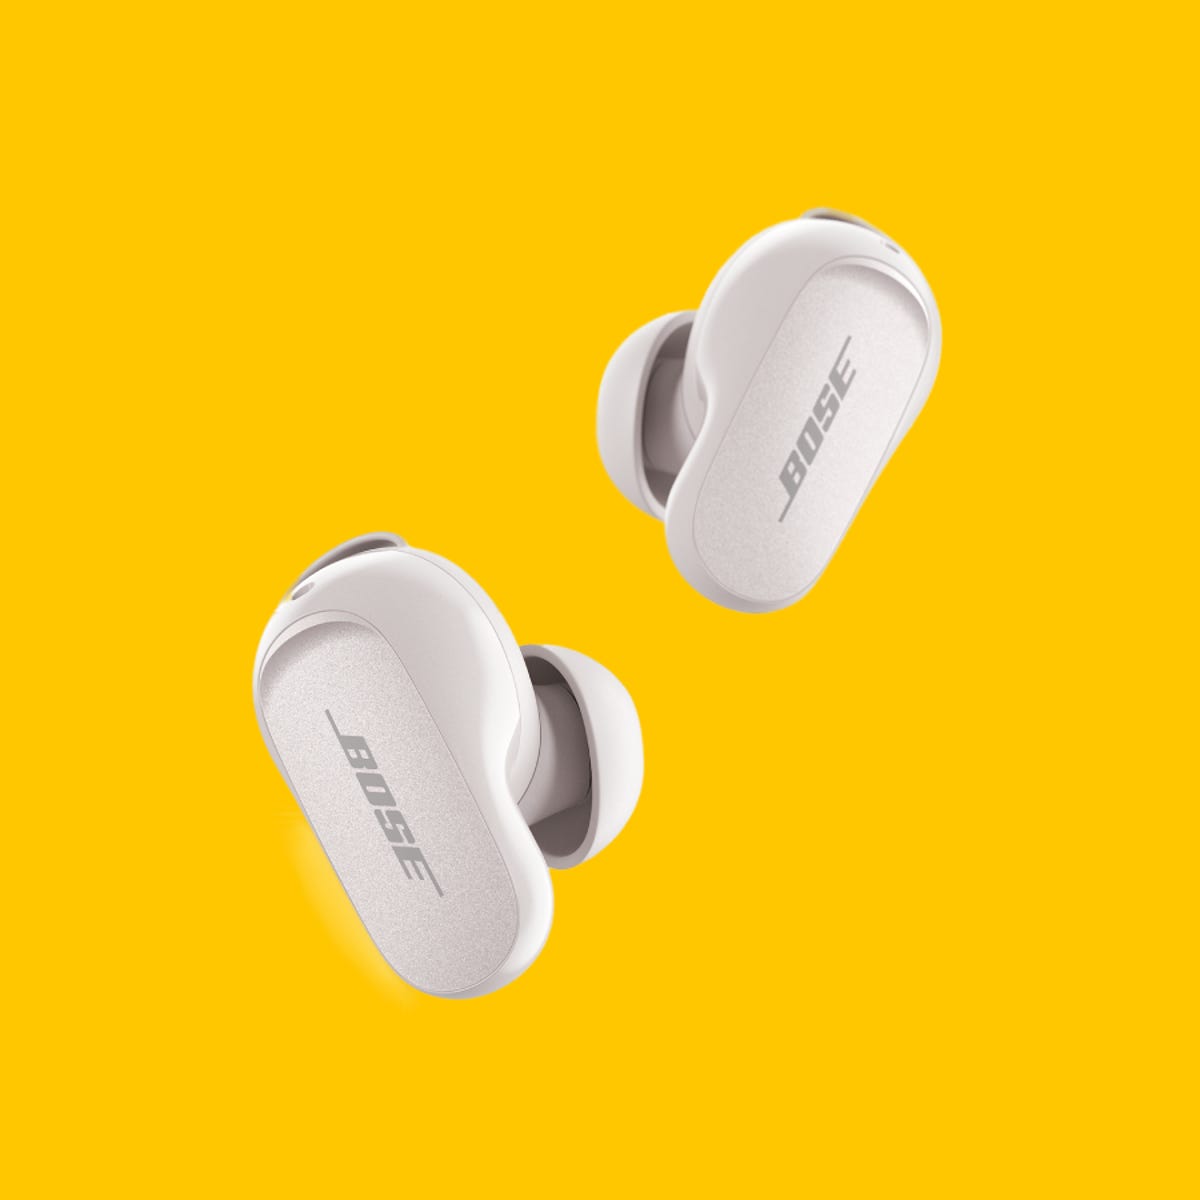 Bose Says Its New QuietComfort Earbuds 2 Have the Best Noise